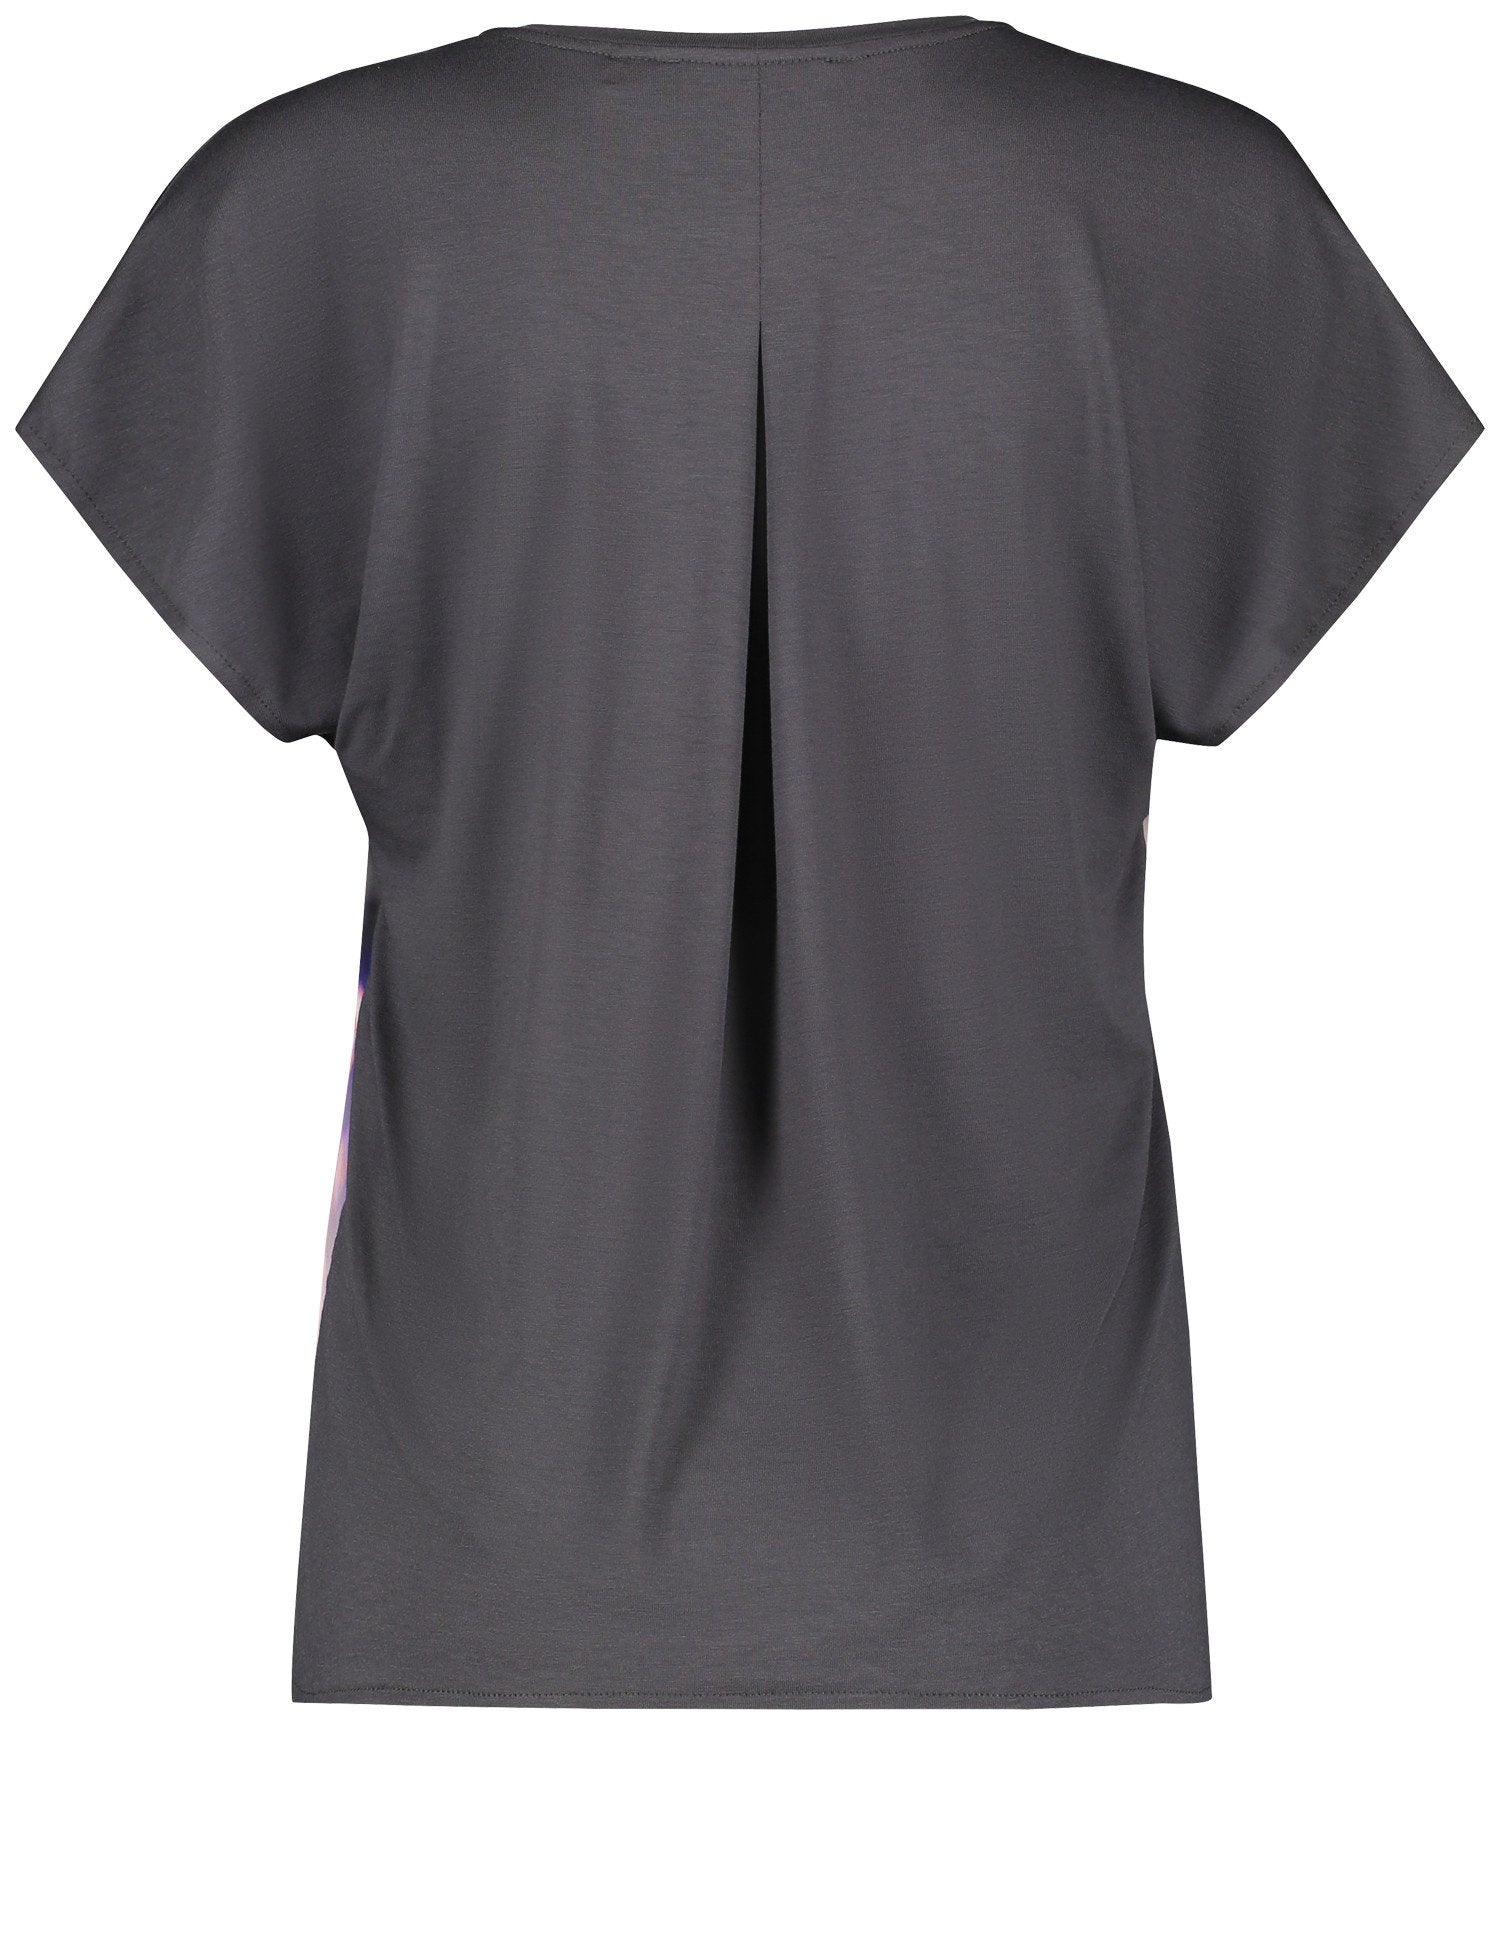 Blouse Top With A V-Neckline_571308-16100_2272_03